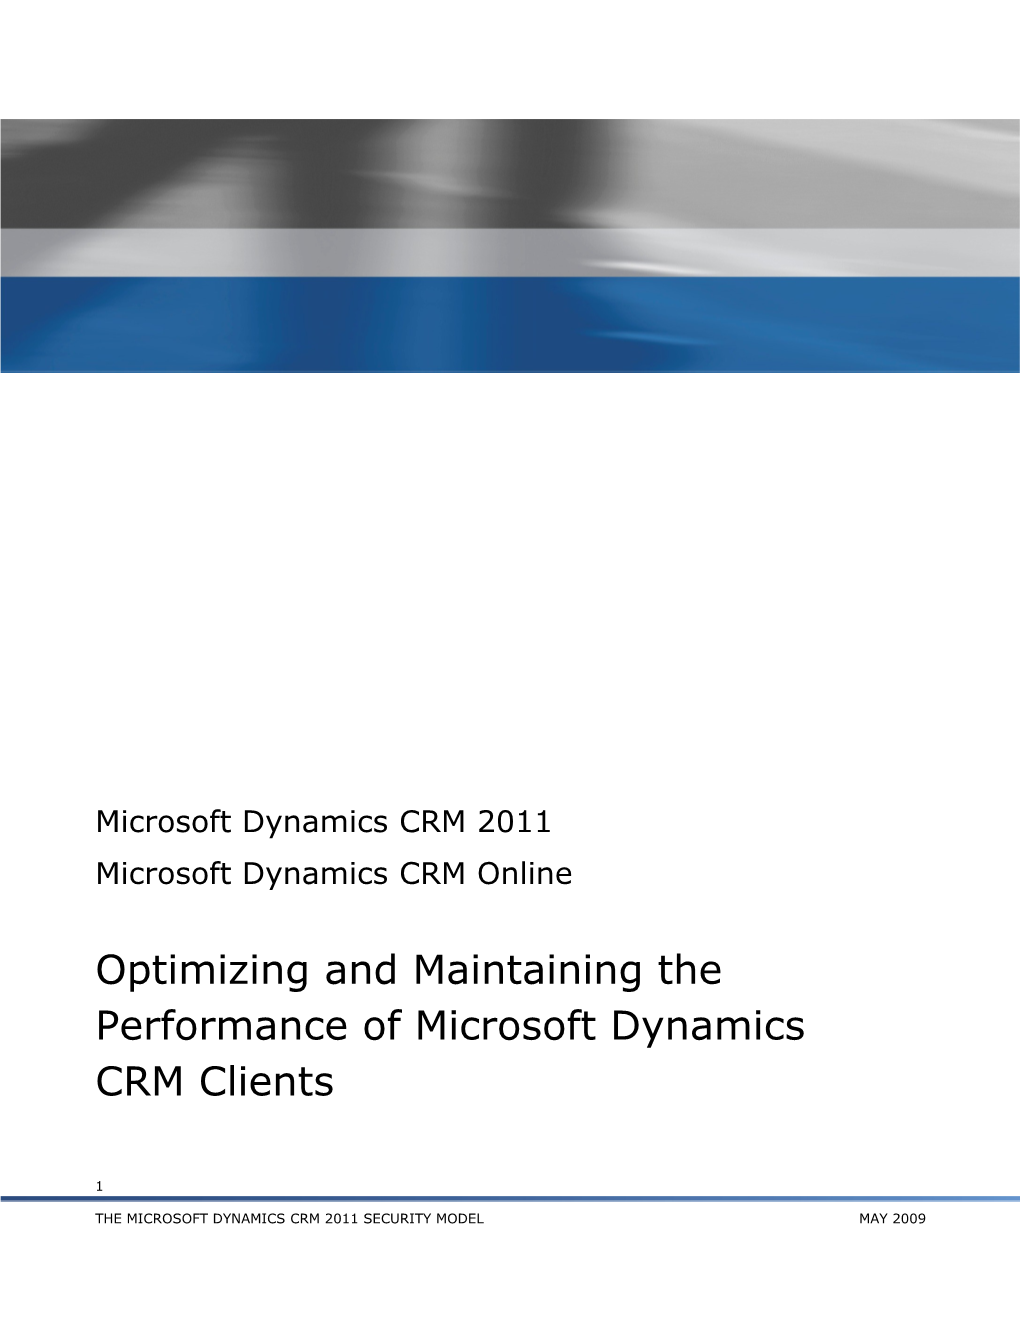 Optimizing and Maintaining the Performance of Microsoft Dynamics Crmclients